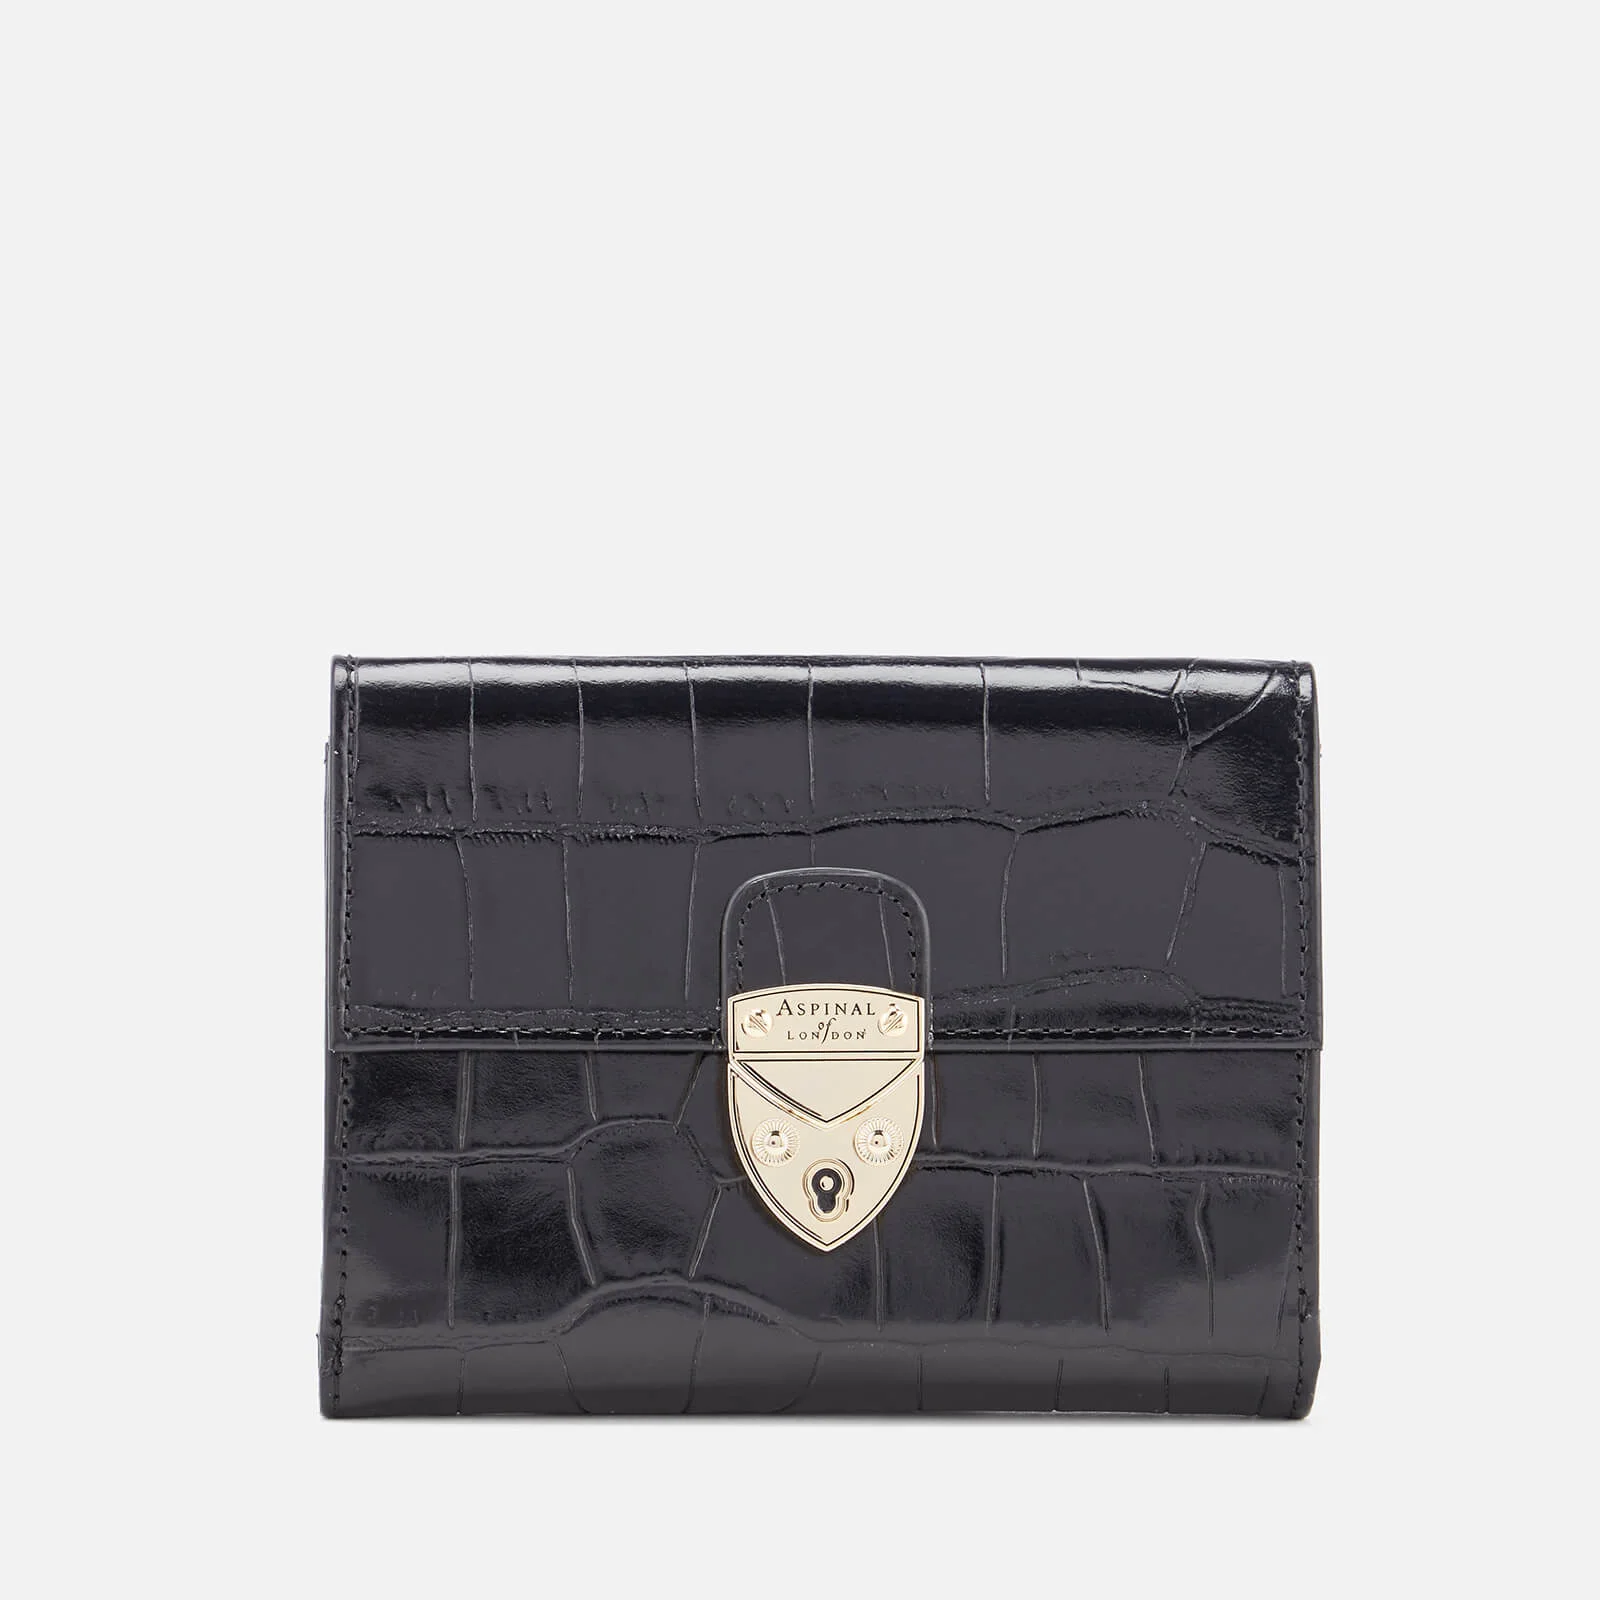 Aspinal of London Women's Mayfair Small Purse - Black Image 1